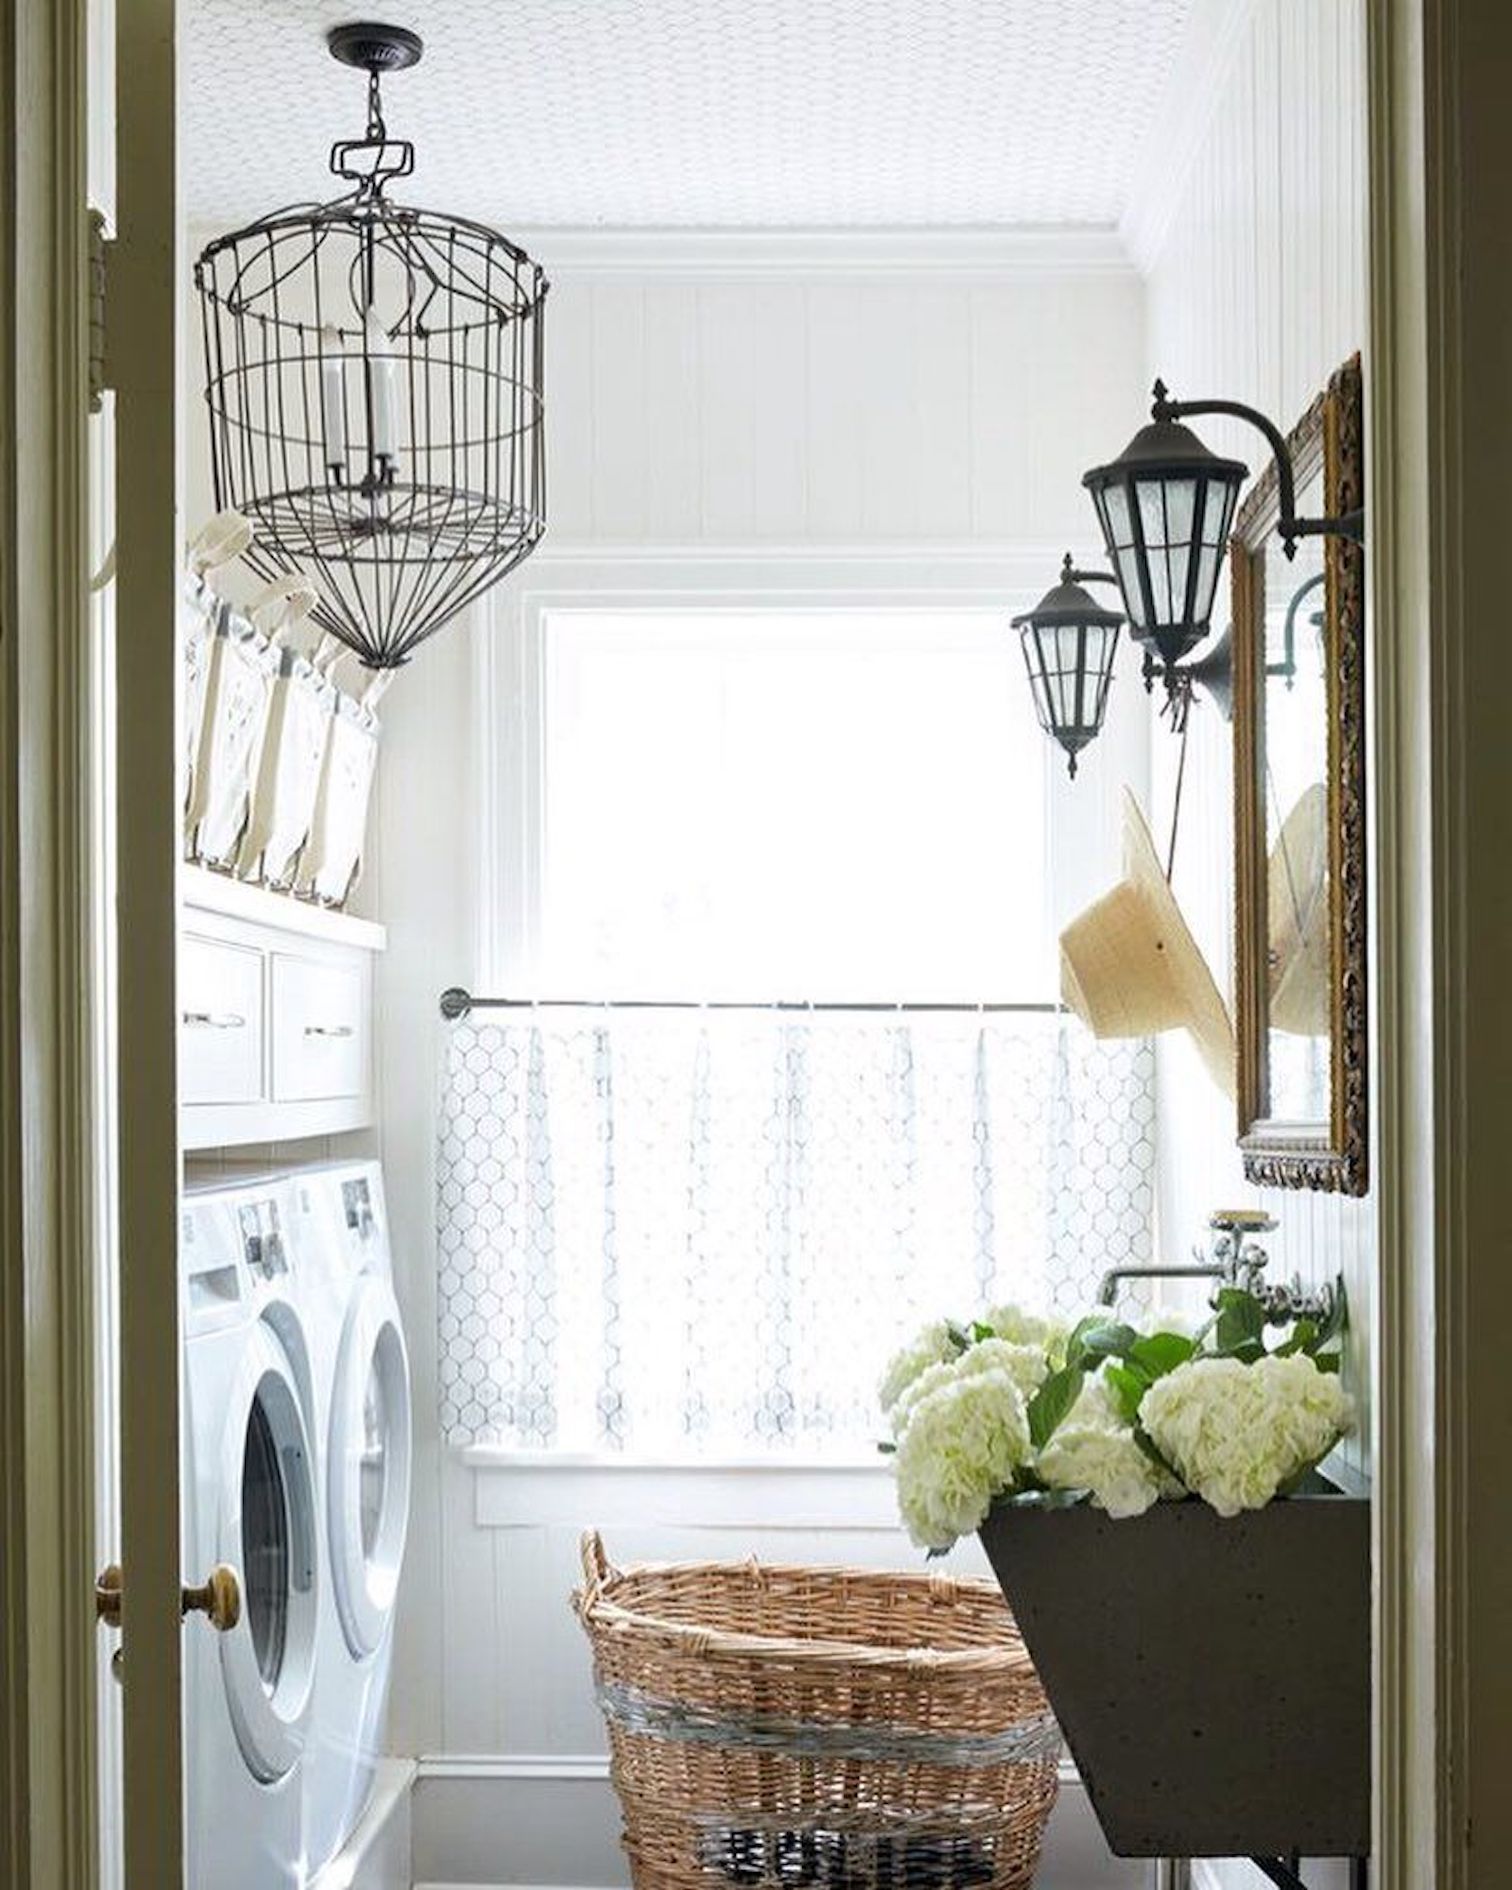 42 Things in Your Laundry Room + Beautiful Decorating Ideas - Toot Sweet 4  Two